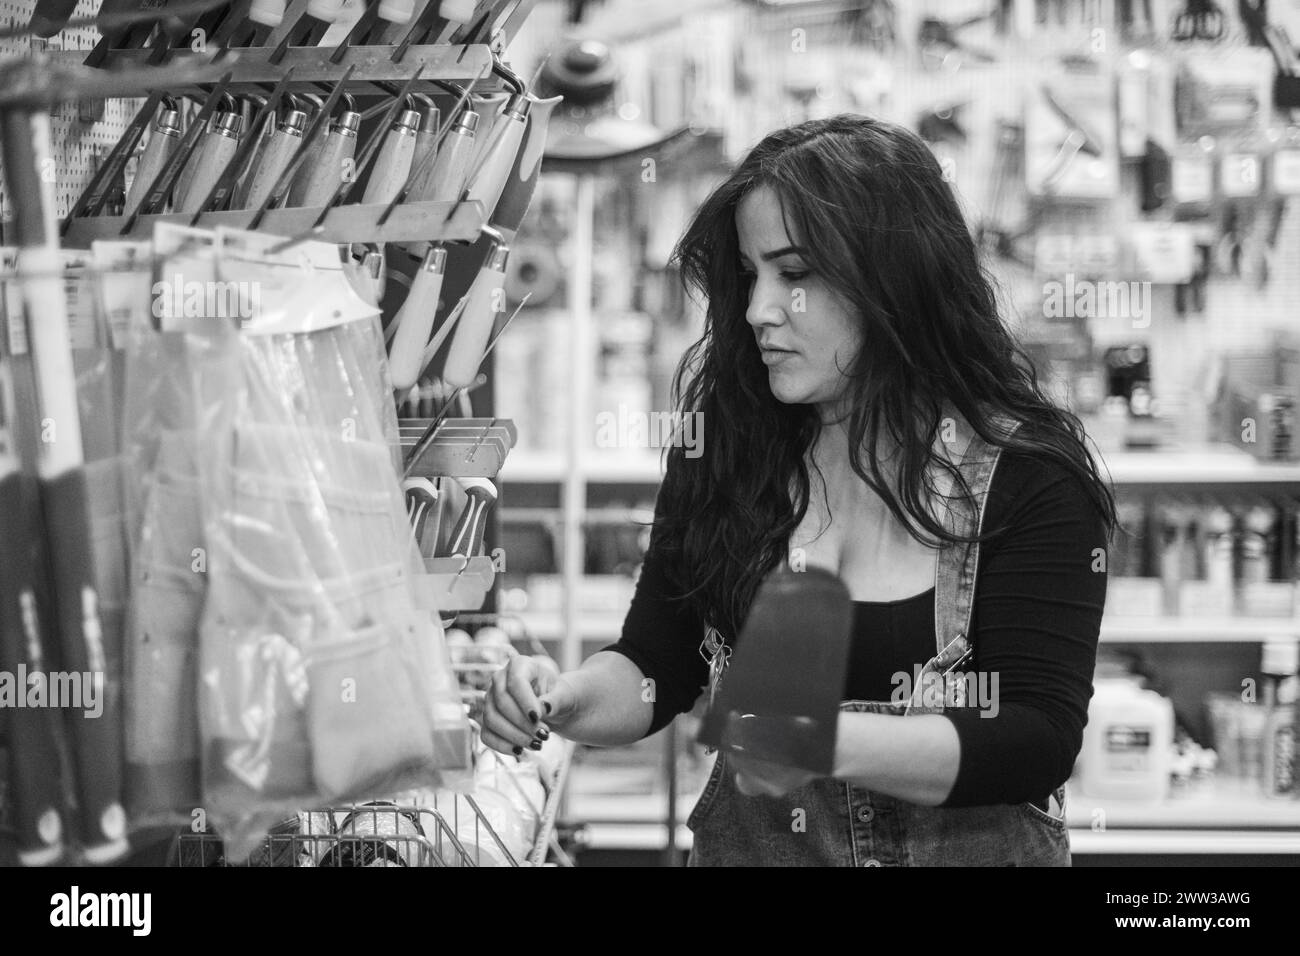 Hispanic worker Woman concentrating on selecting a tool in a monochrome hardware store setting Stock Photo